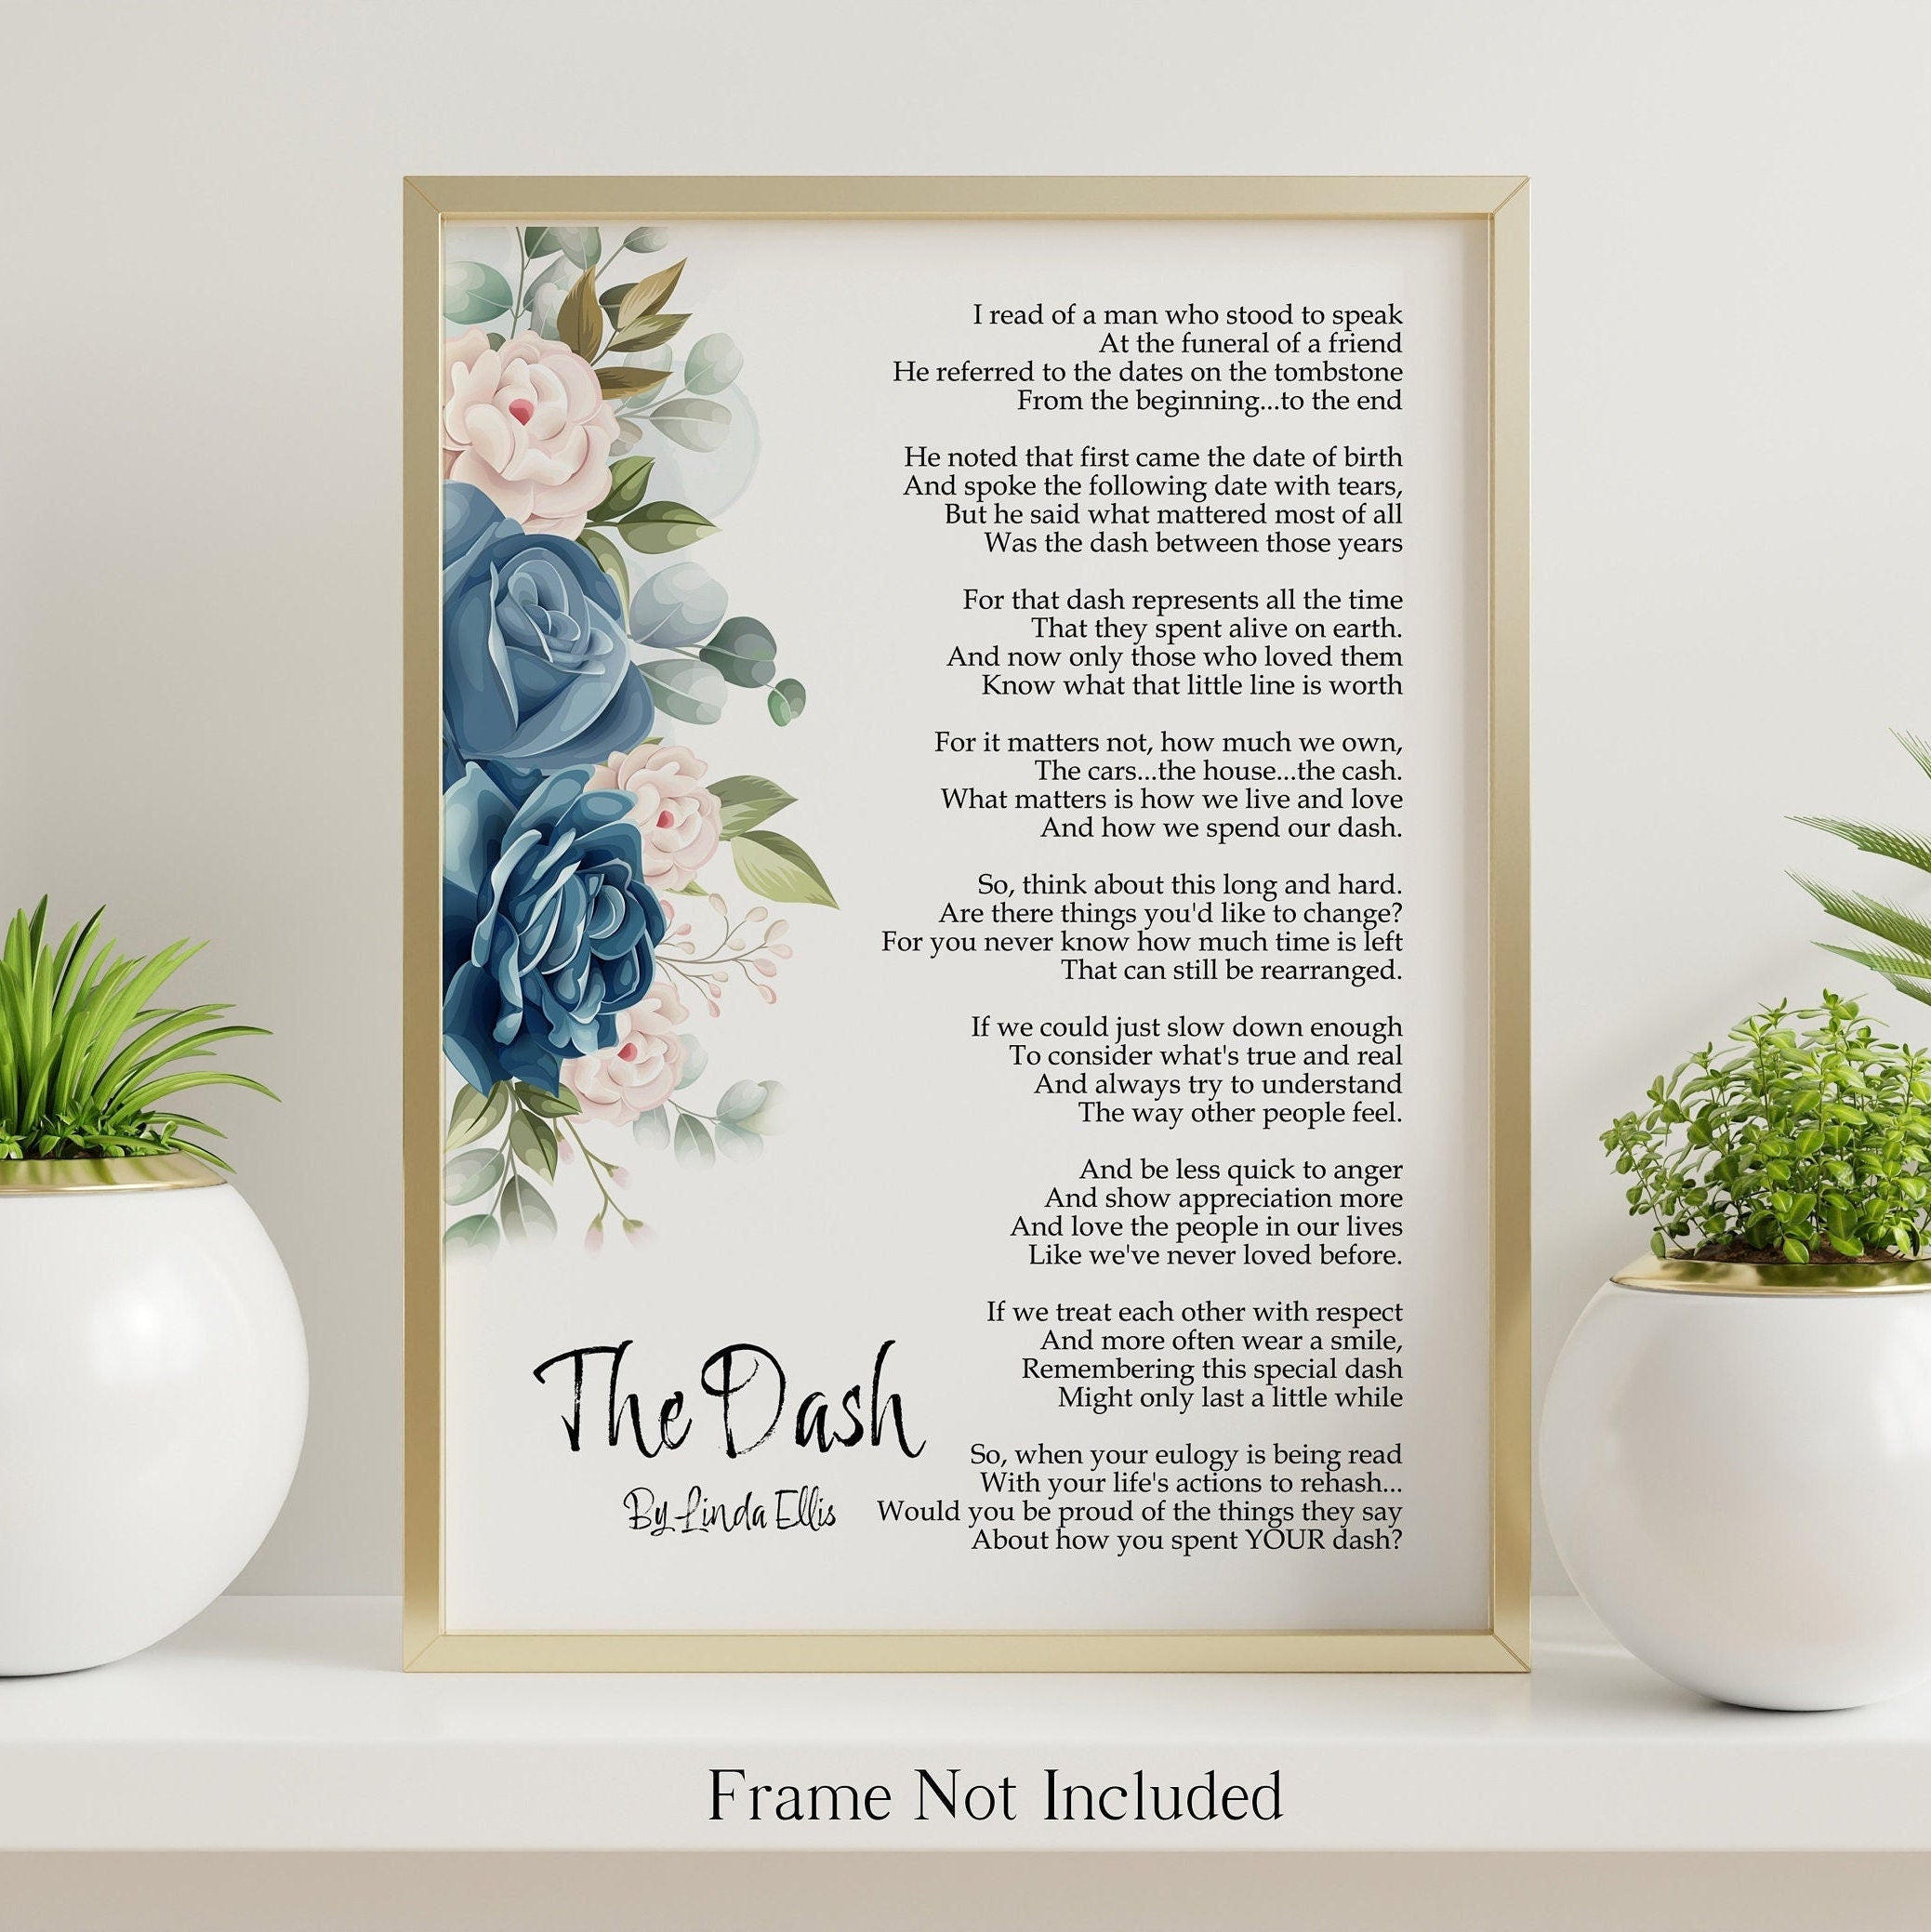 T Cribb & Sons on X: The Dash Poem, written by Linda Ellis, is a modern  funeral poem that has become a favourite in our services over the years  it discusses the